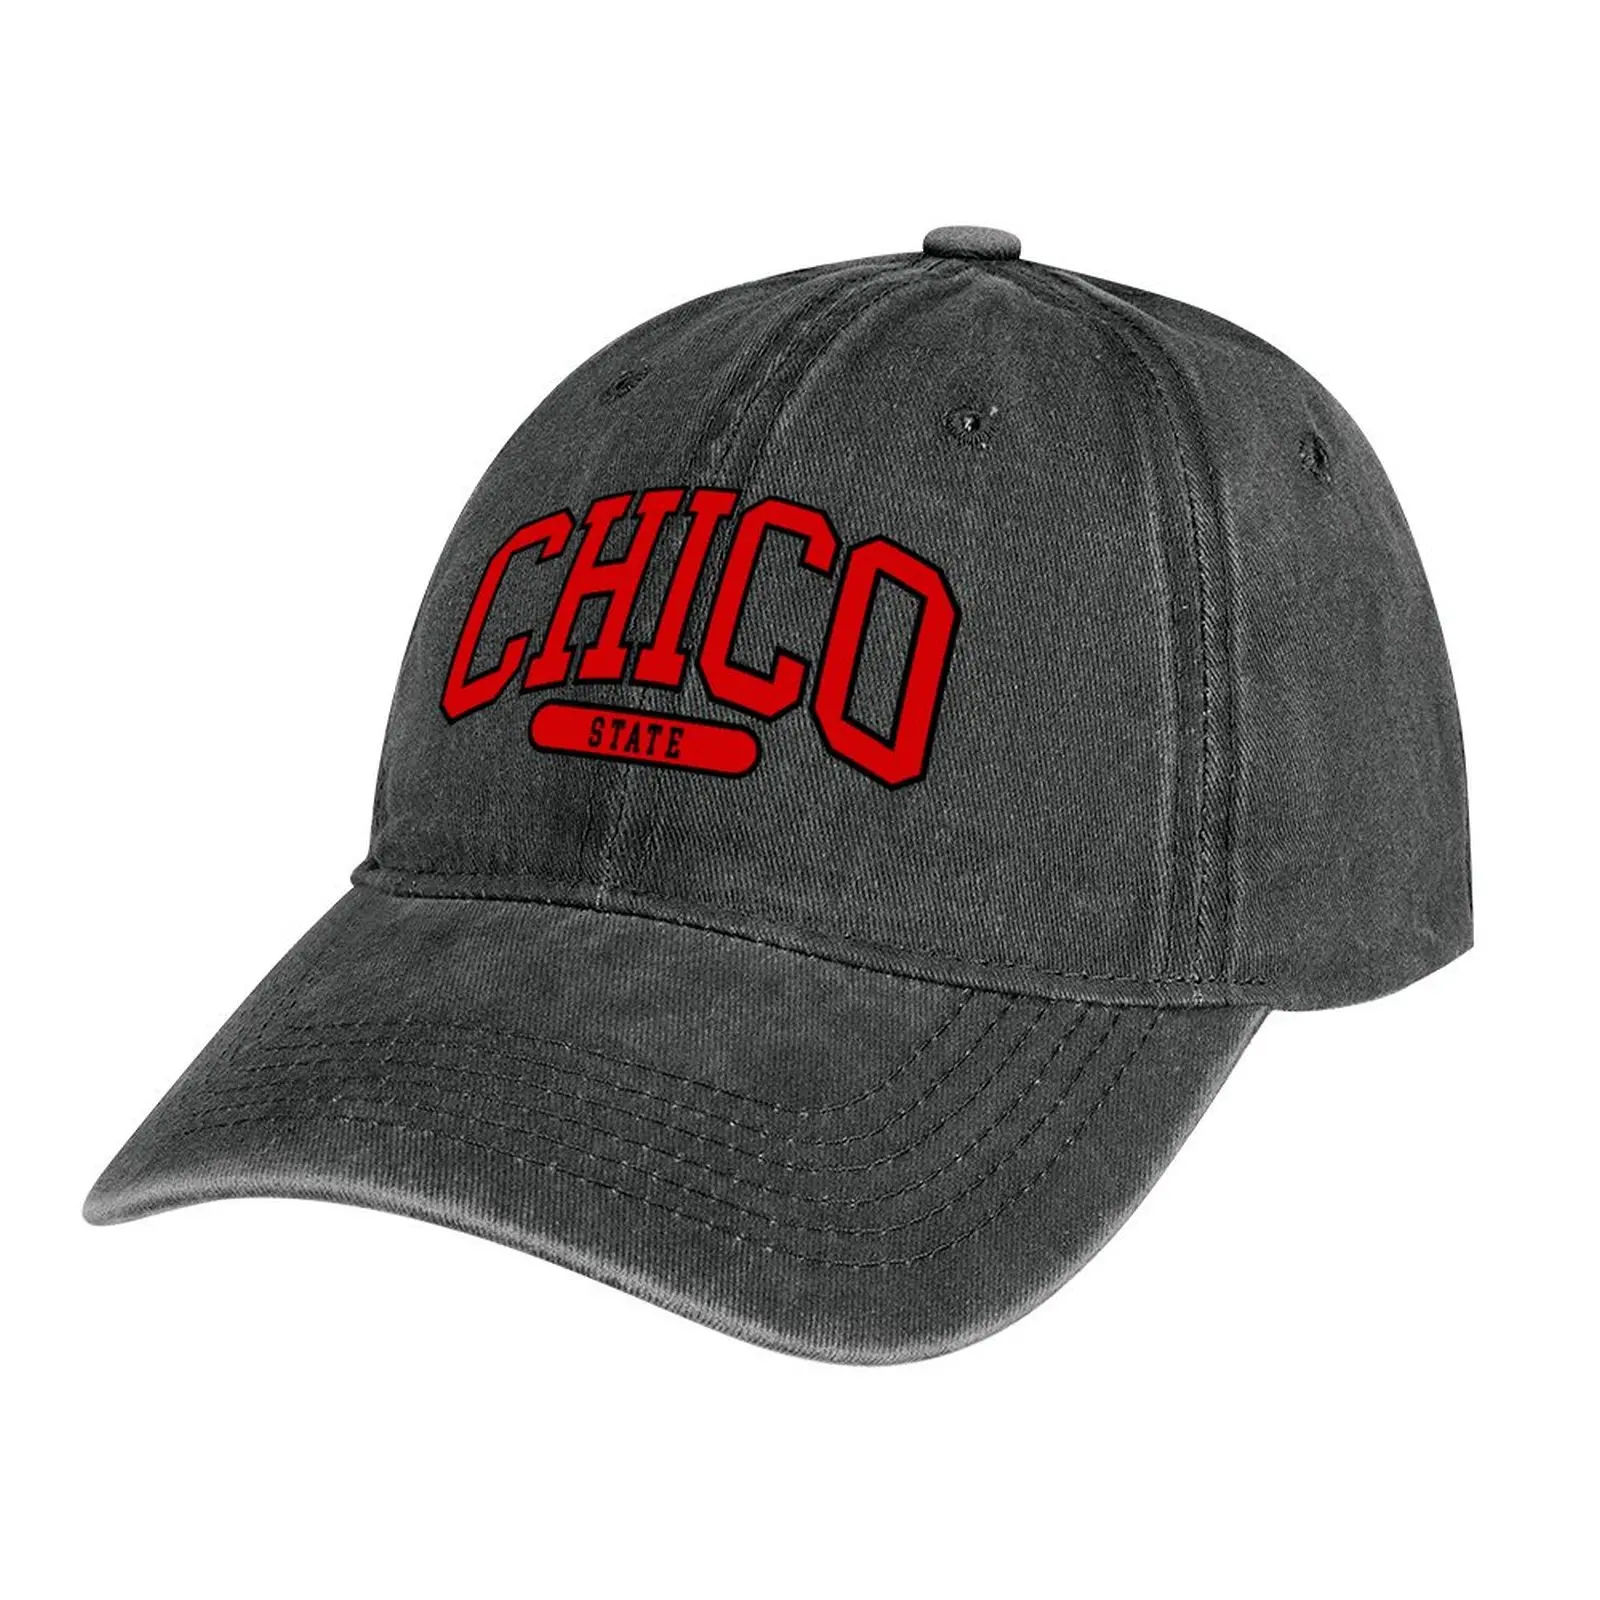 

chico state - college font curved Cowboy Hat summer hat Luxury Cap sun hat Sunscreen Baseball For Men Women's